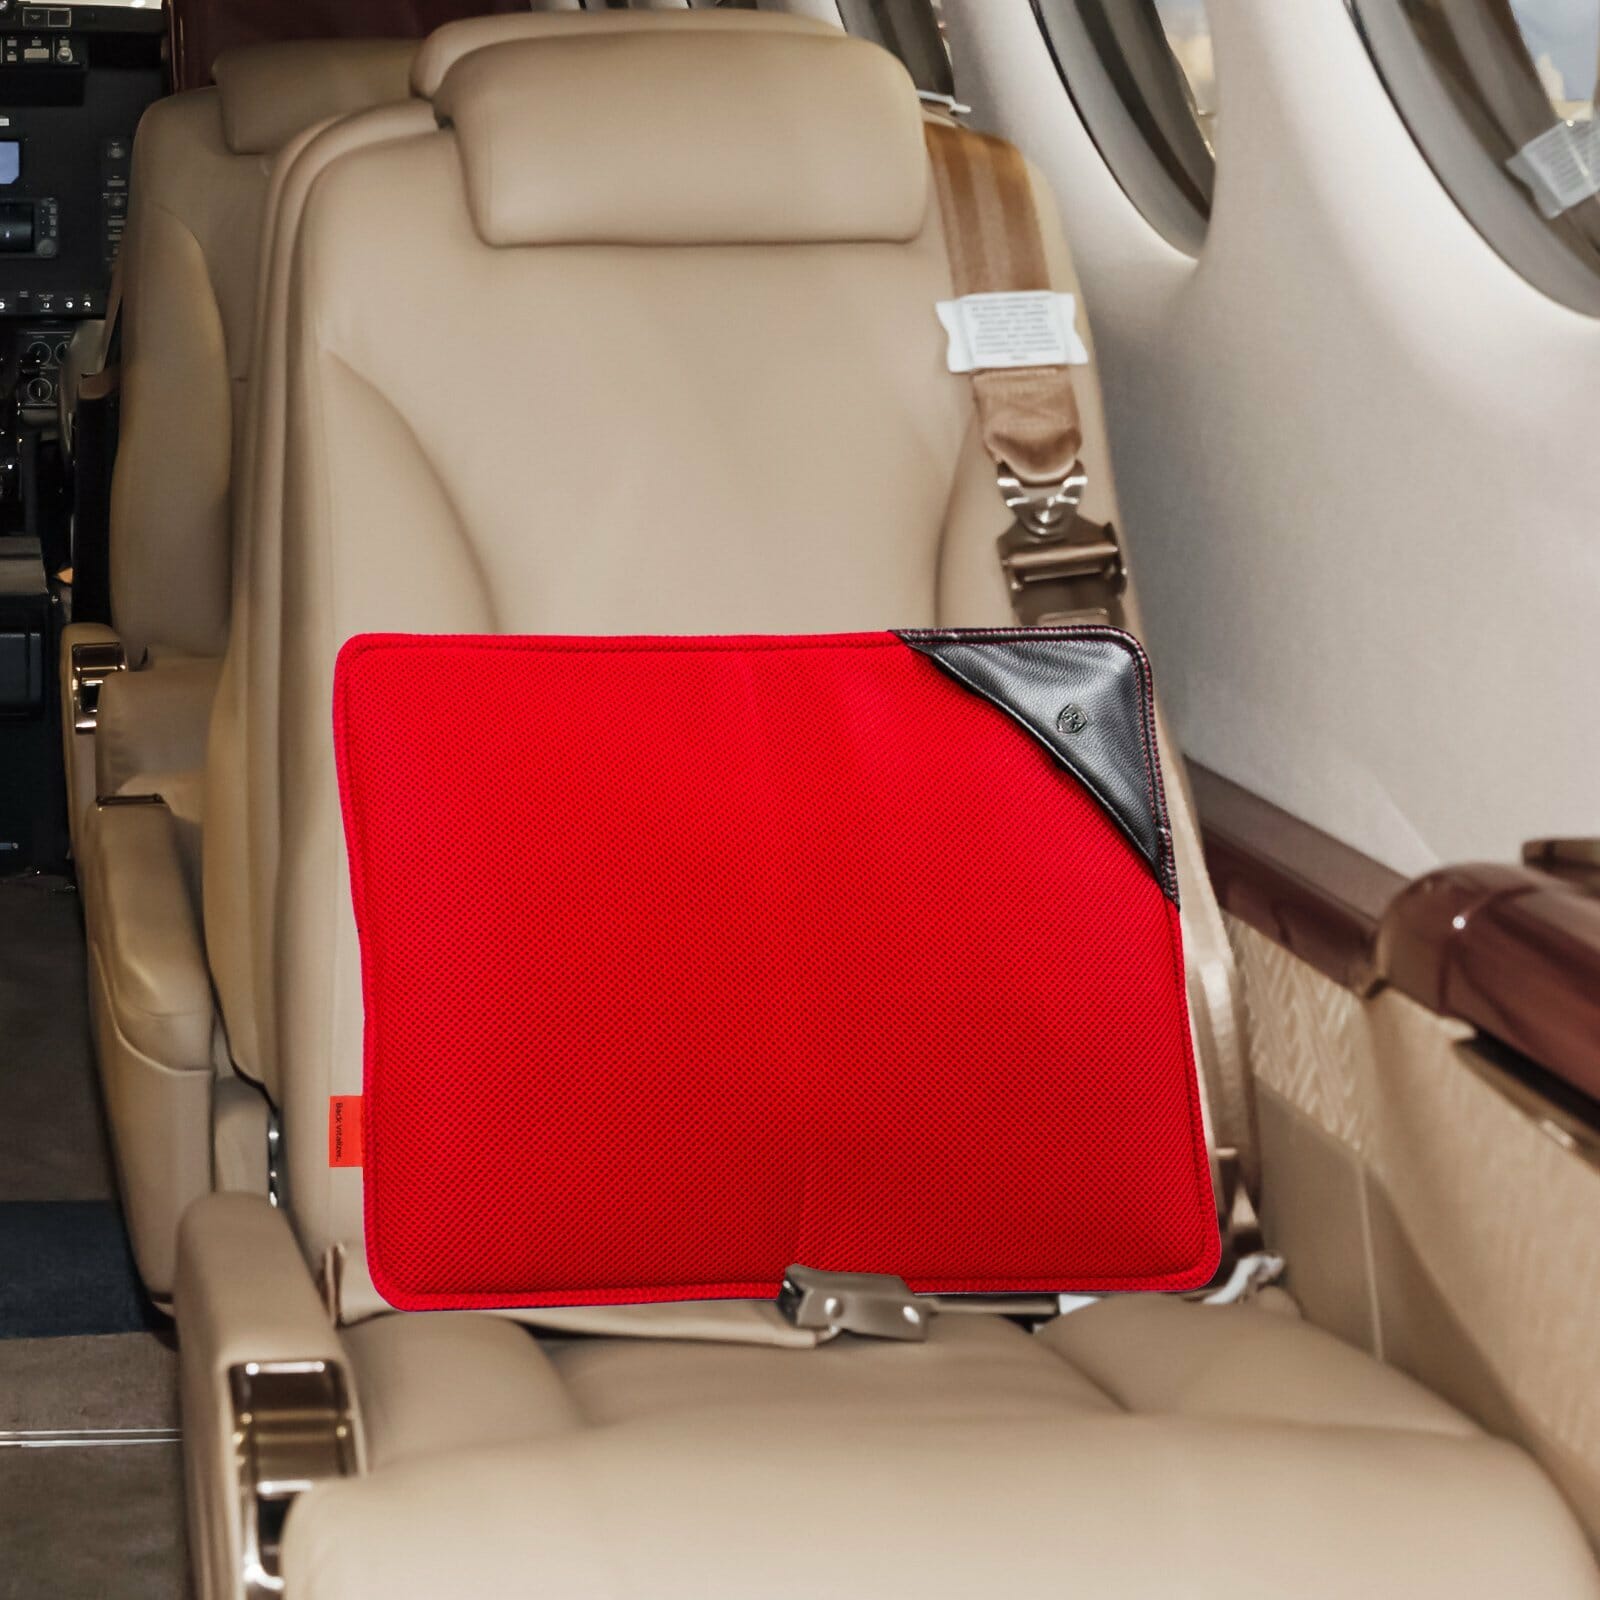 Airline Seats and Back Pain: Why to Use a Lumbar Support Pillow